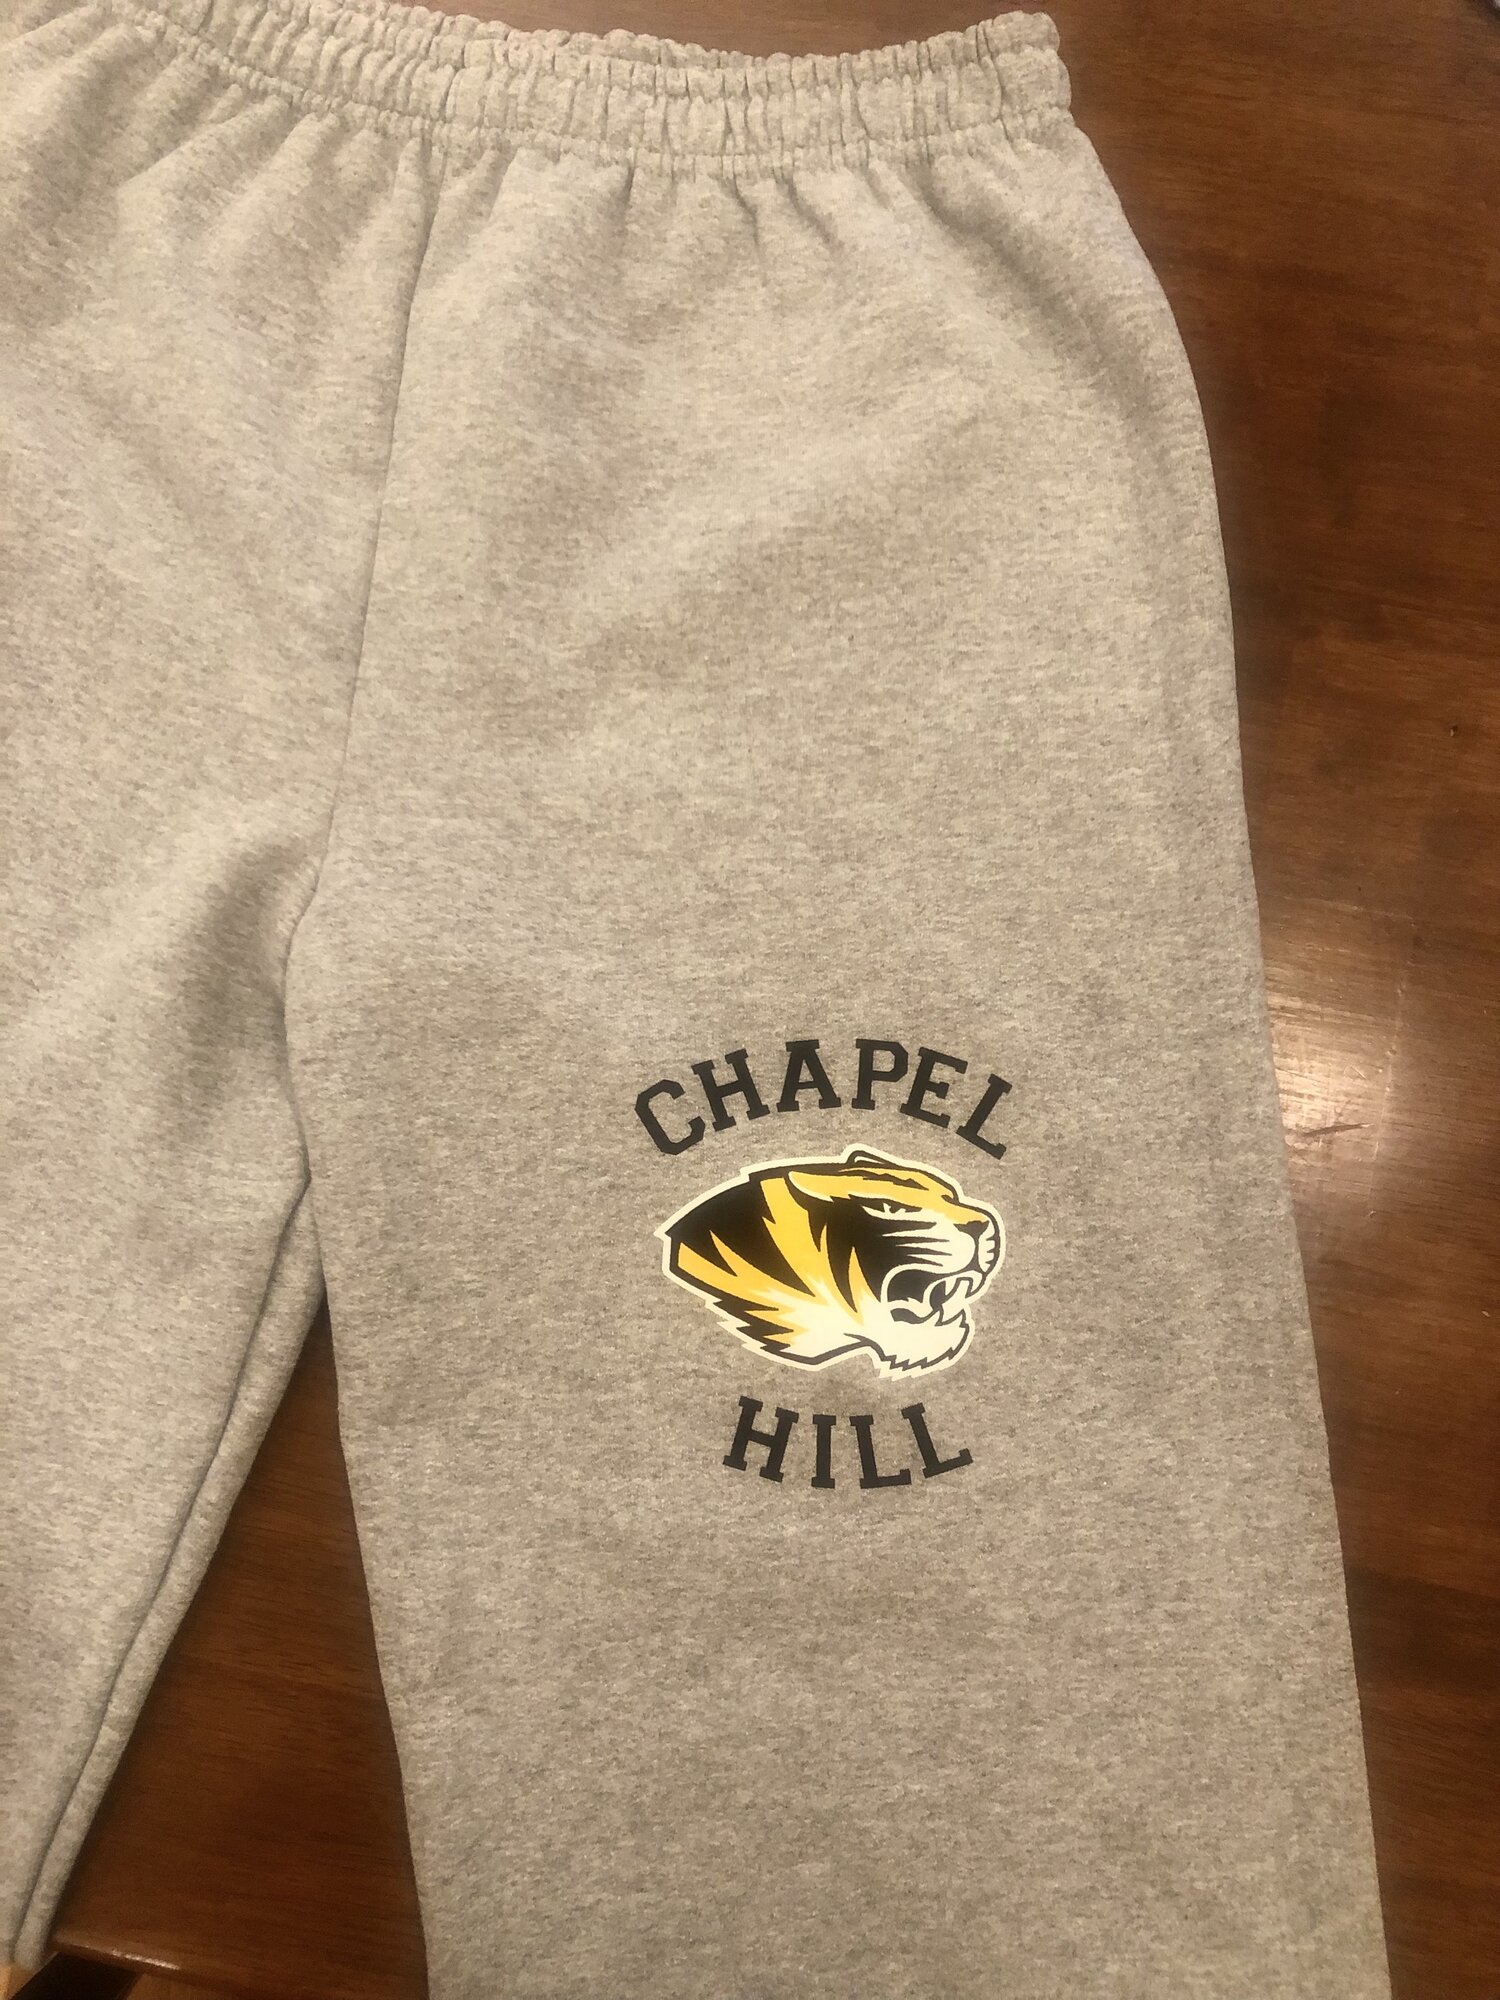 Sweatpants - CHHS Tiger — CHHS Athletic Booster Club